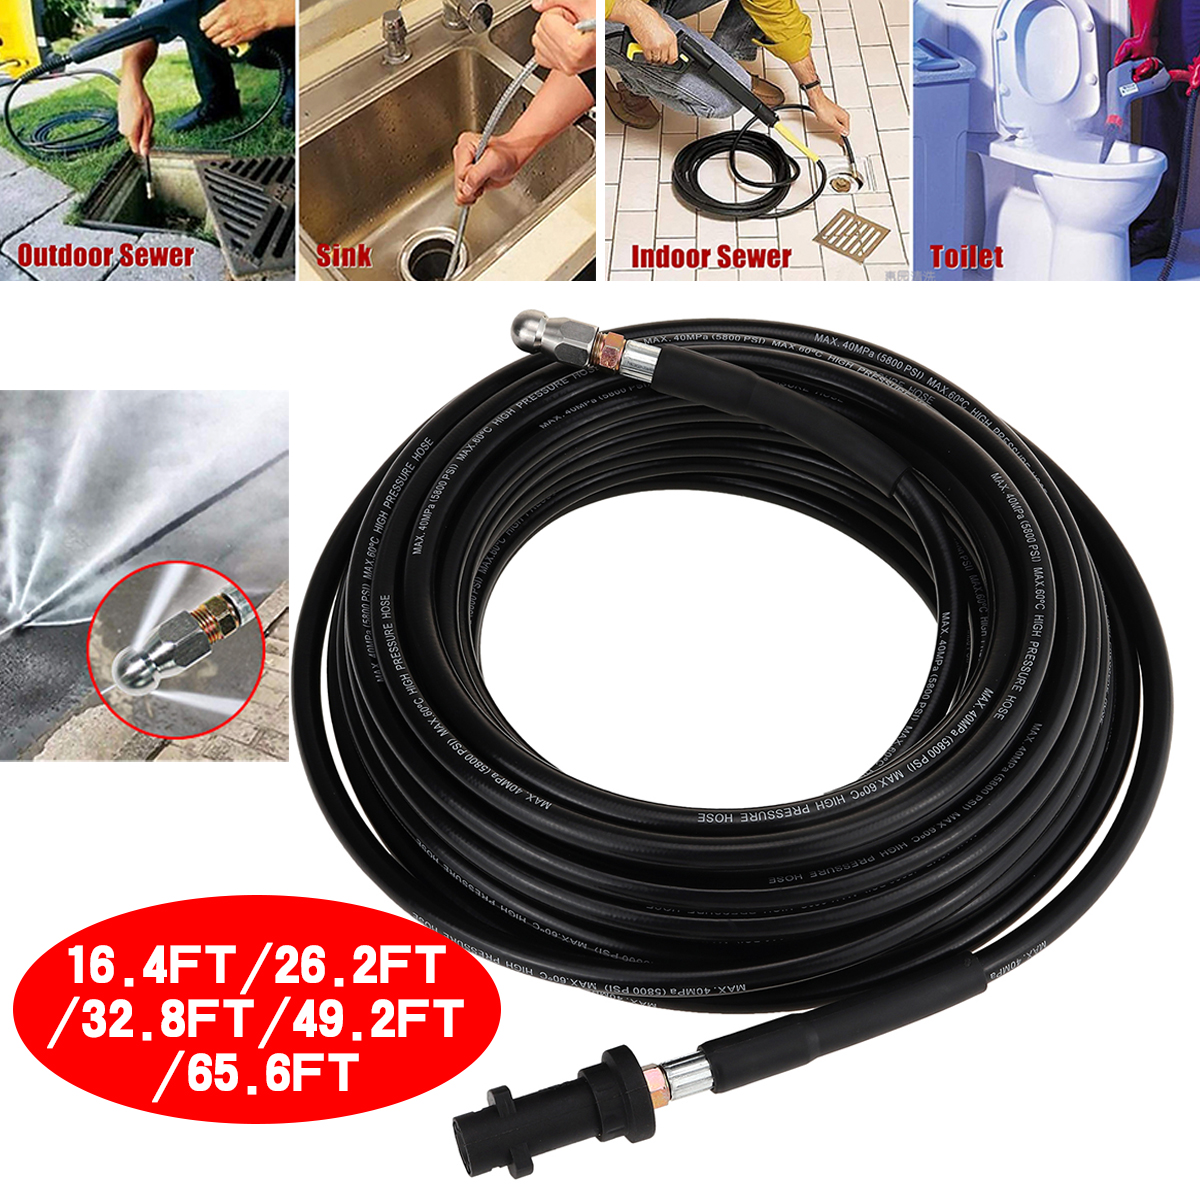 5-20M-Sewer-Jet-Pressure-Washer-Hose-with-Button-Nose-Sewer-Jetter-Nozzle-1720900-1